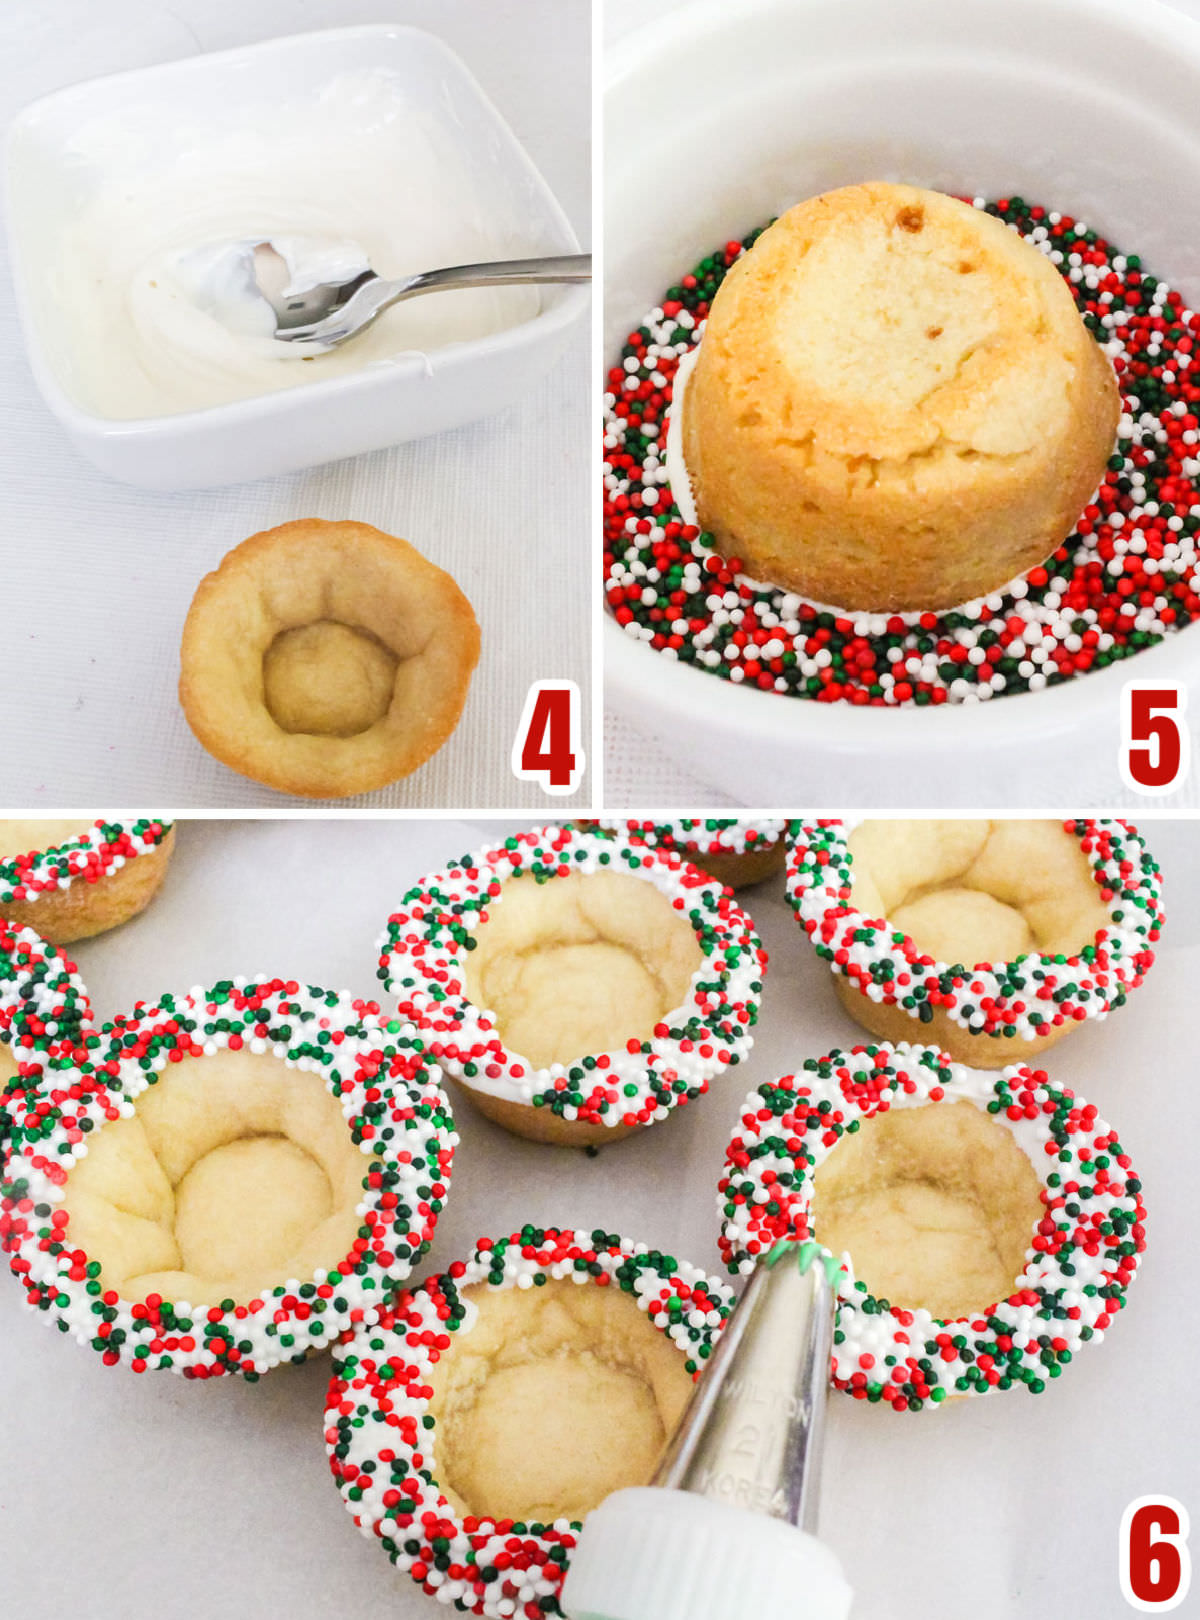 Collage image showing the steps for decorating the rims of the cookie cups.